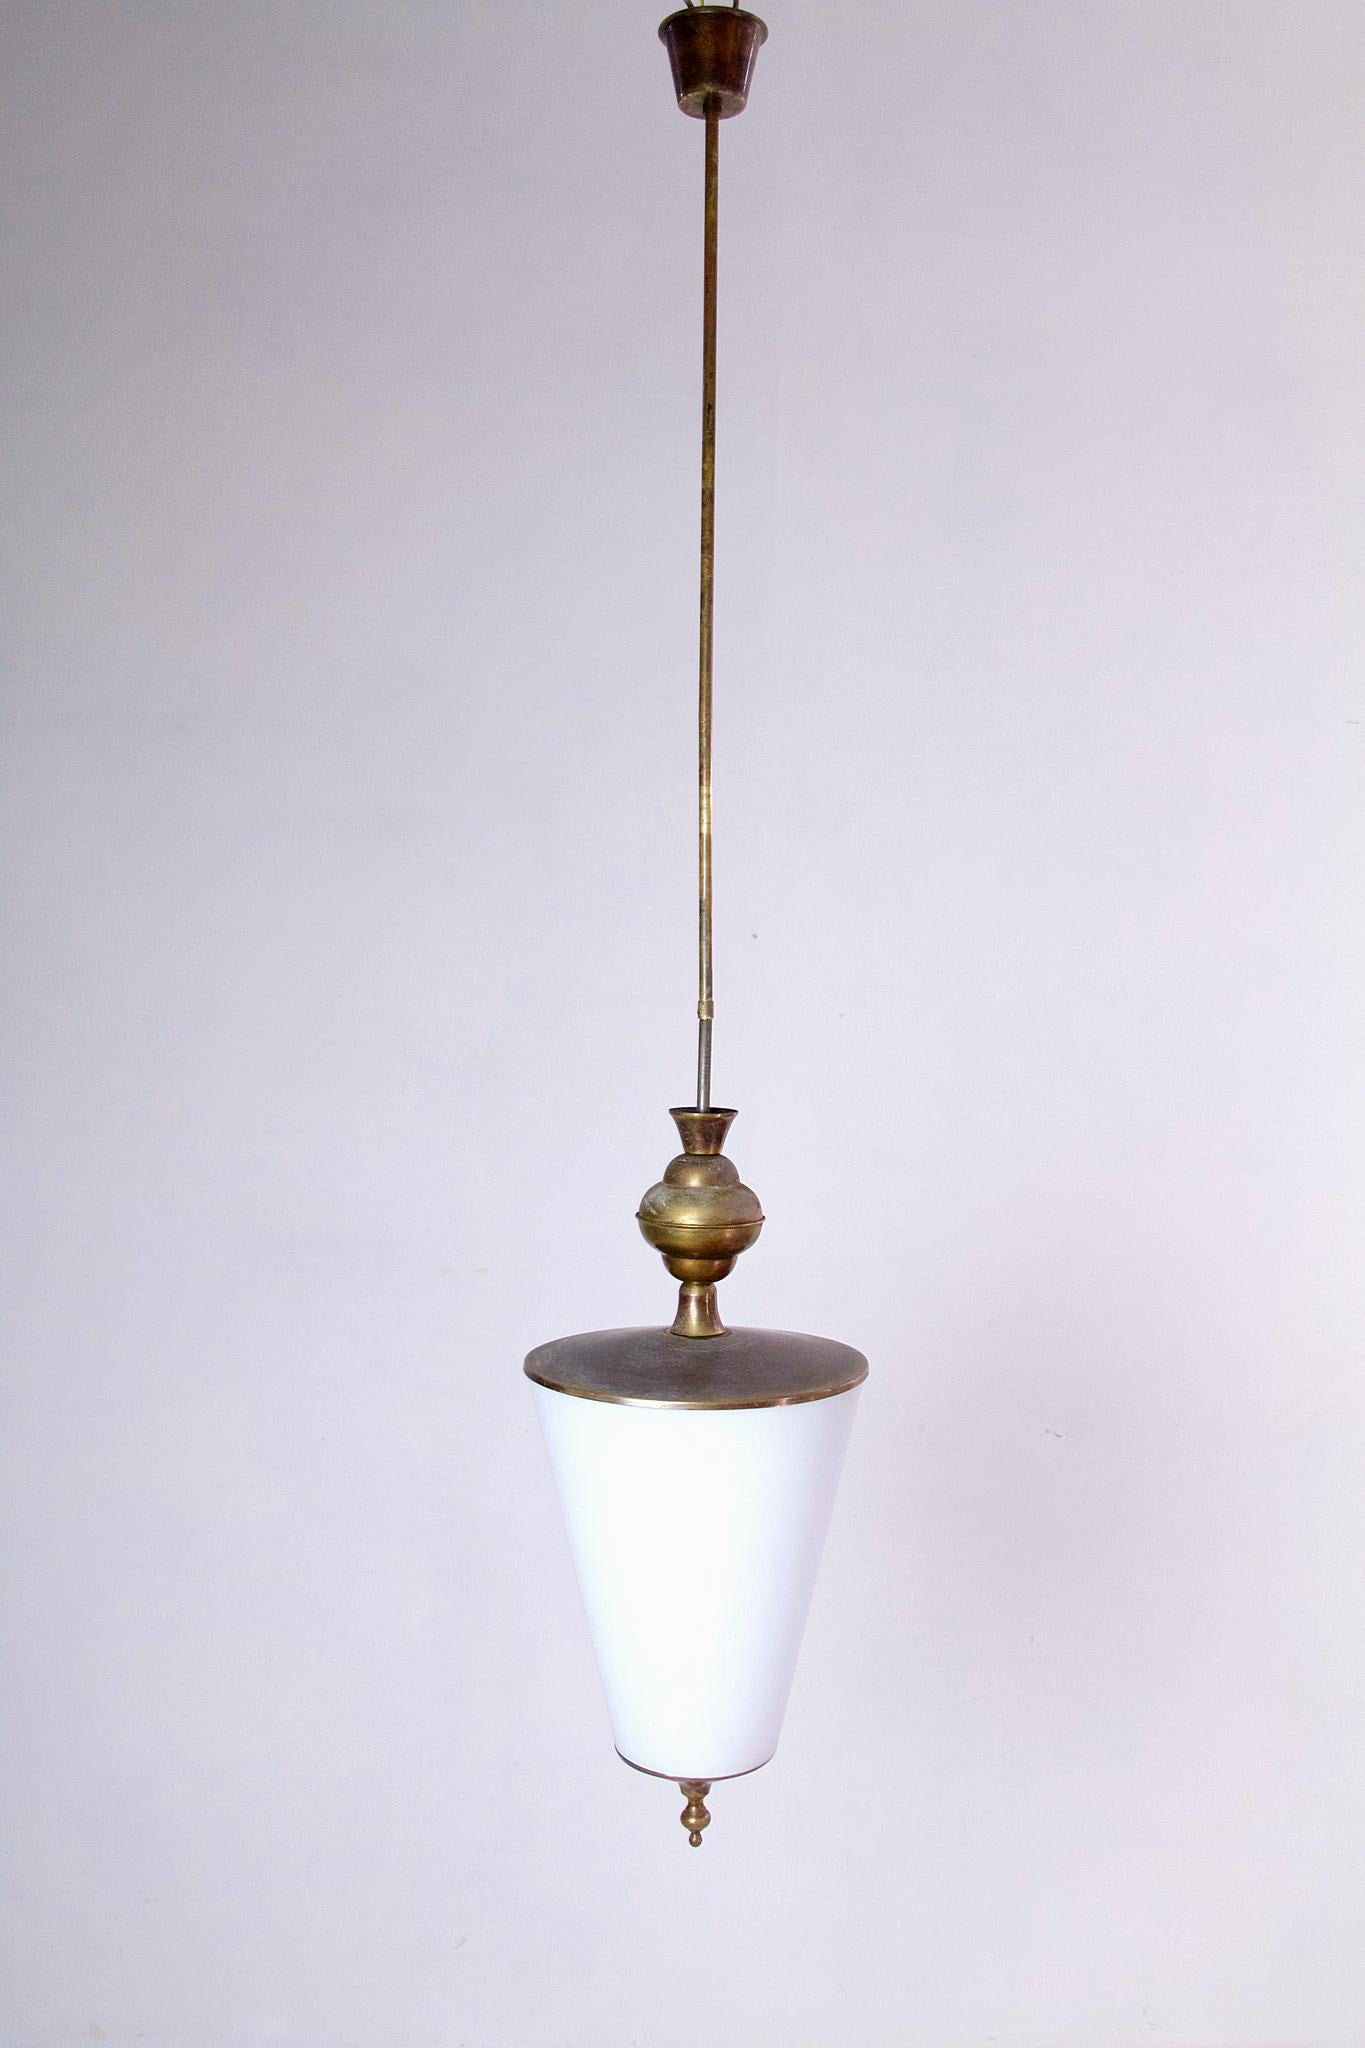 A 1950s sleek pendant in brass with an original opaline glass shade. The brass is lacquered in the pics but can be polished on request of course. The total height can be adjusted between 130 cm or 60 cm.